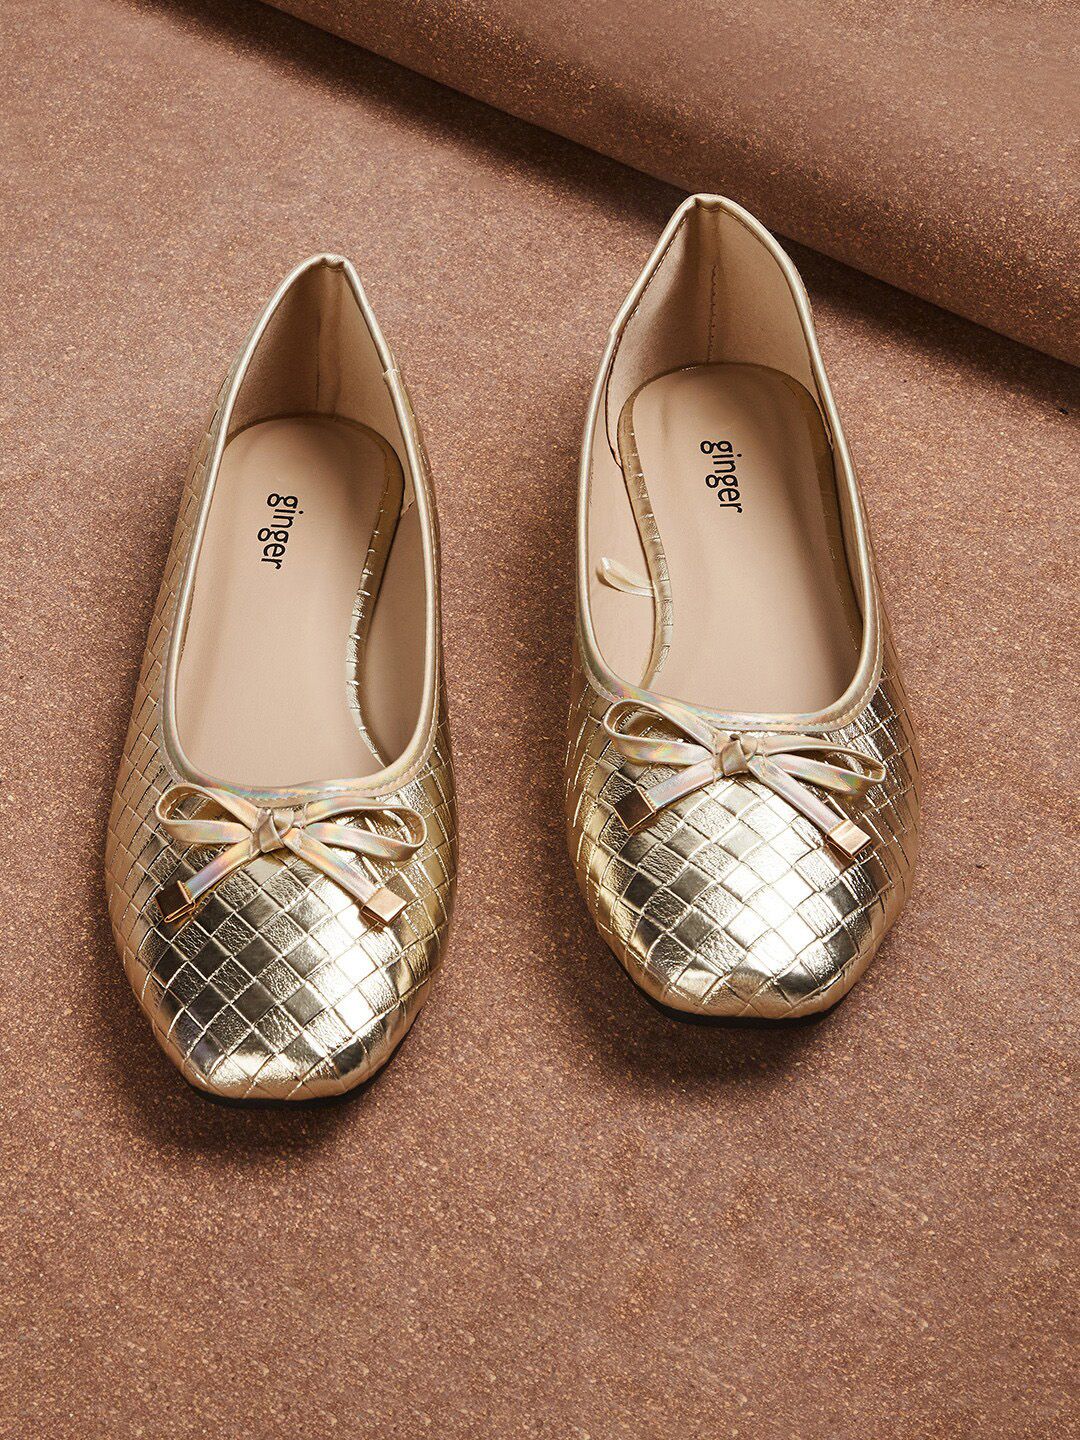 Ginger by Lifestyle Women Gold-Toned Ballerinas with Bows Price in India